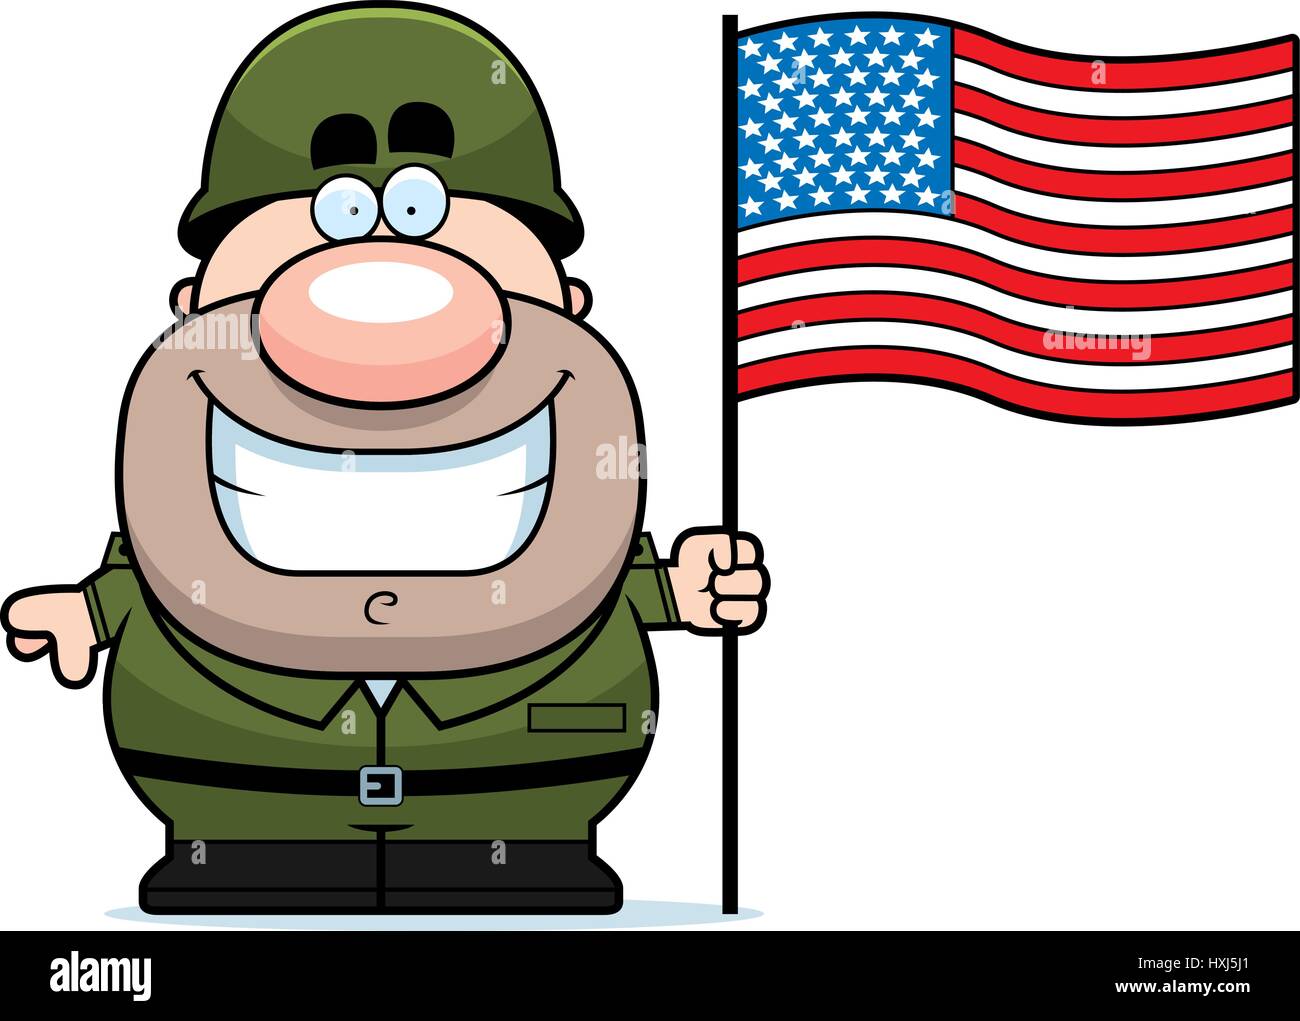 A cartoon illustration of an army soldier with an American flag. Stock Vector